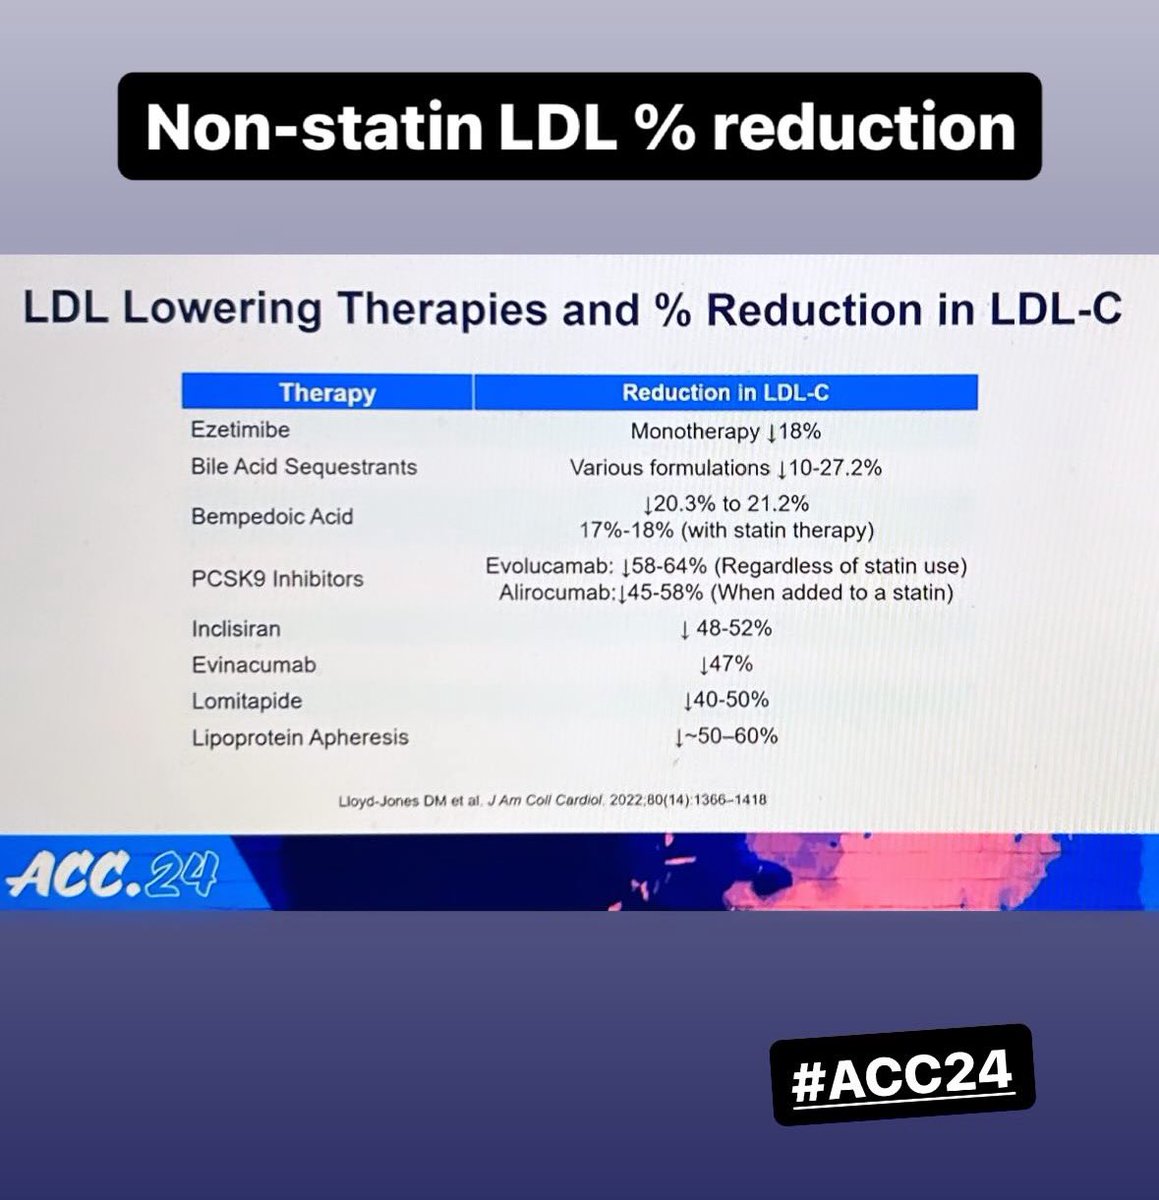 Non-statin LDL lowering therapies and % reduction via #ACC24

@CardiacTrials